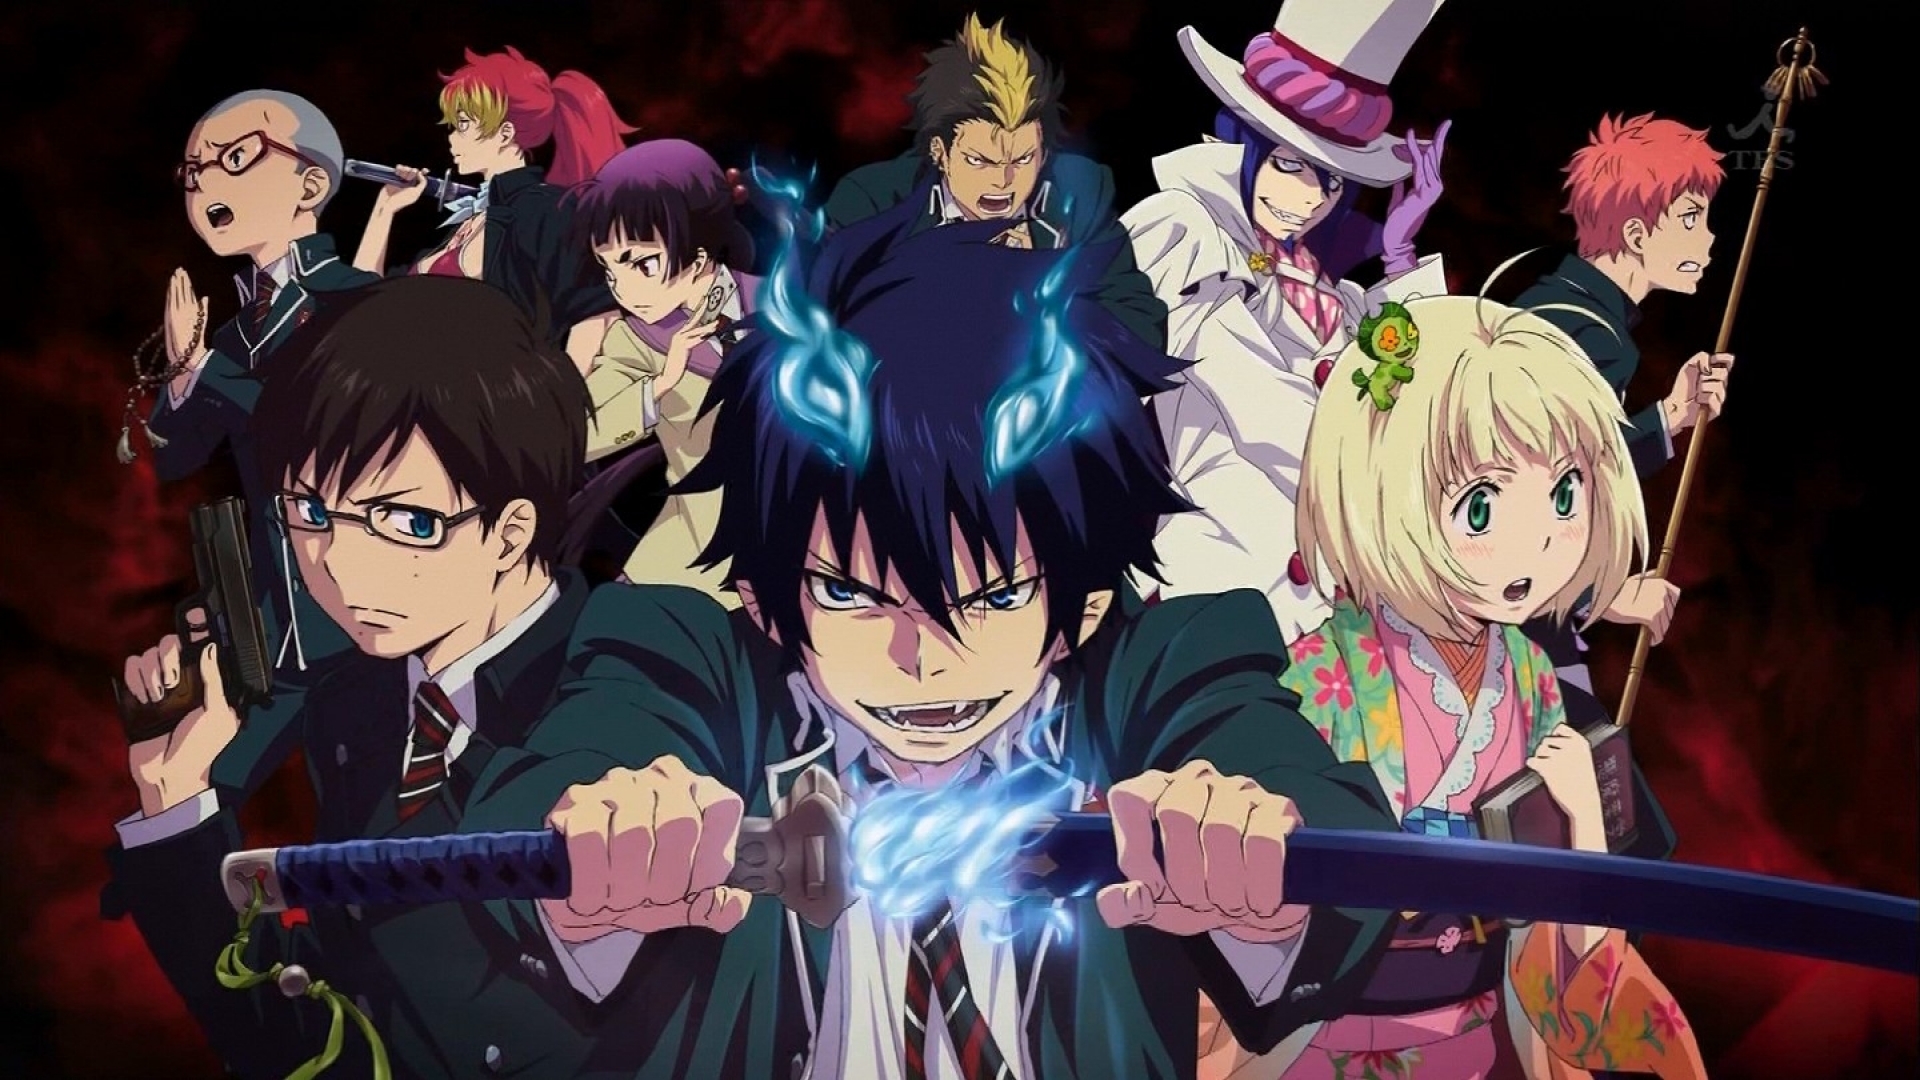 1. Blue Exorcist - wide 7